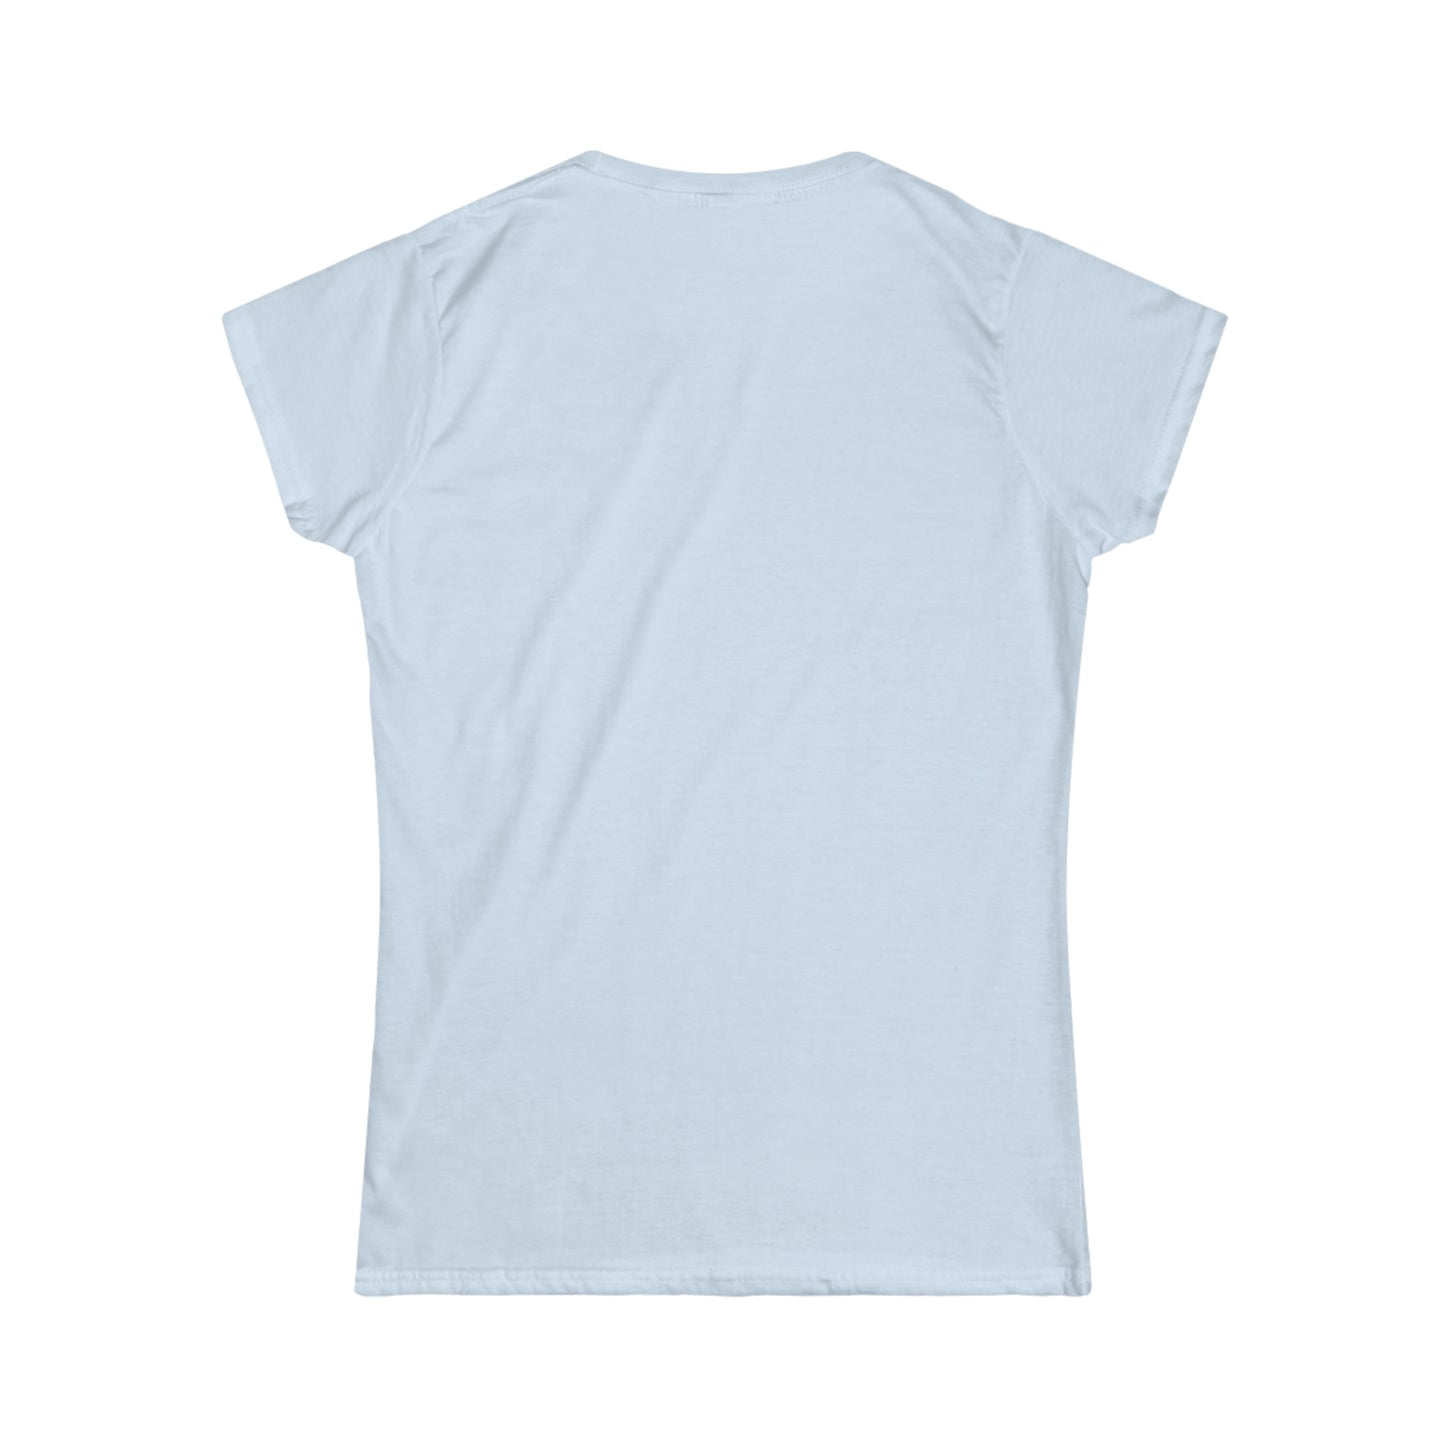 Women's Ragged Branch Softstyle Tee